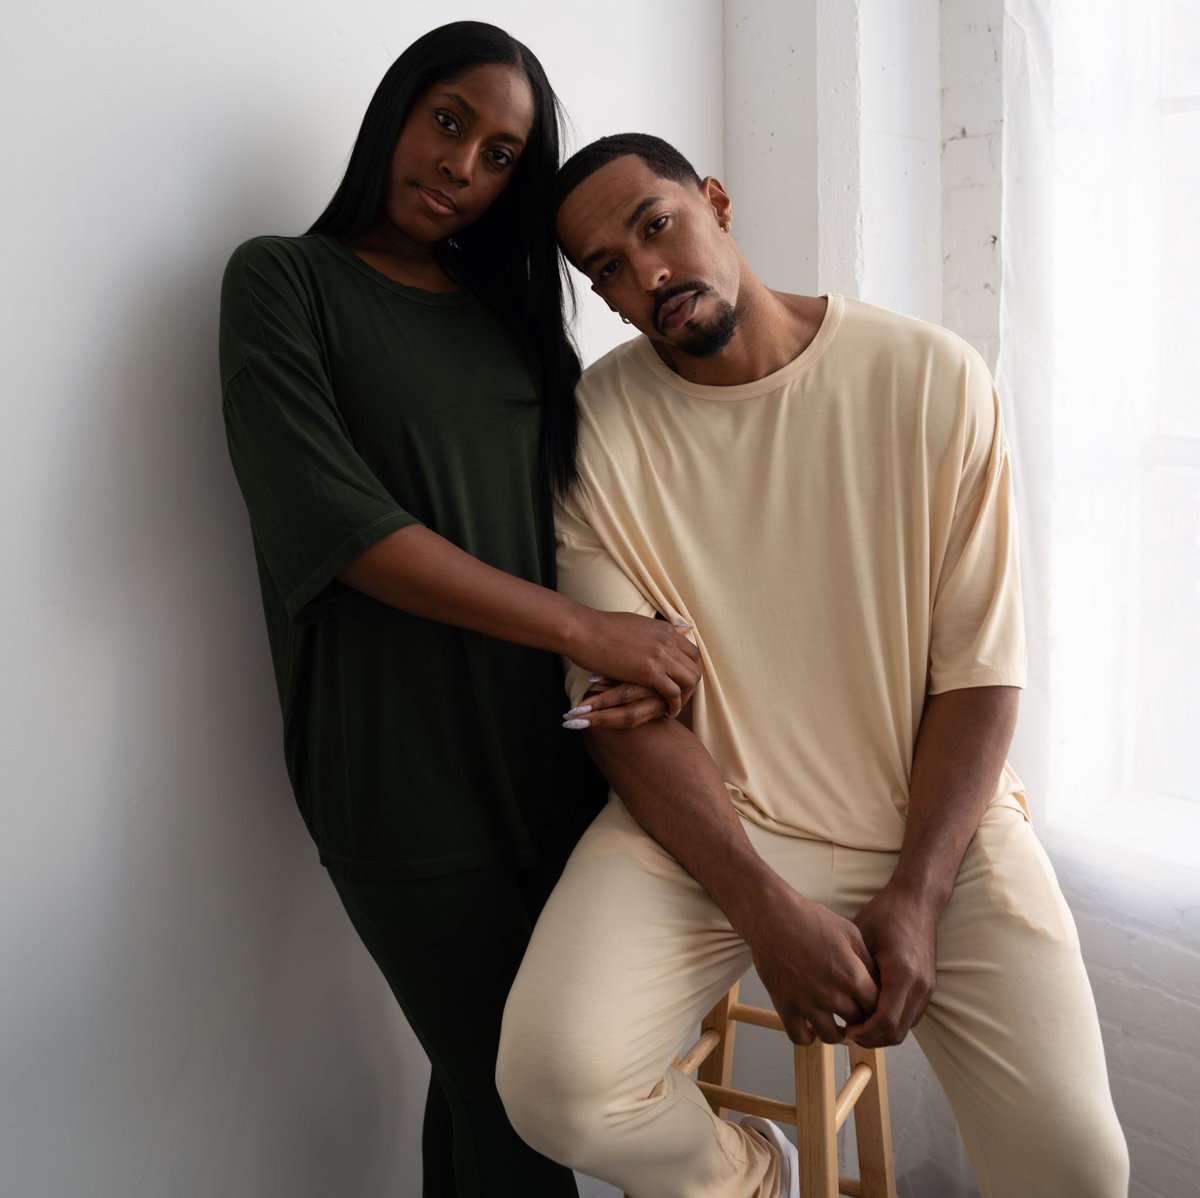 Experience blissful comfort with our 'made' bamboo fabric loungewear, designed for couples who prioritize relaxation and style. 💫 #BambooBliss #CoupleComfort 

#BambooLoungewear
#CouplesFashion
#MatchingSets
#ComfortCouples
#BambooMatchingSet
#CouplesStyle
#LoungewearLove